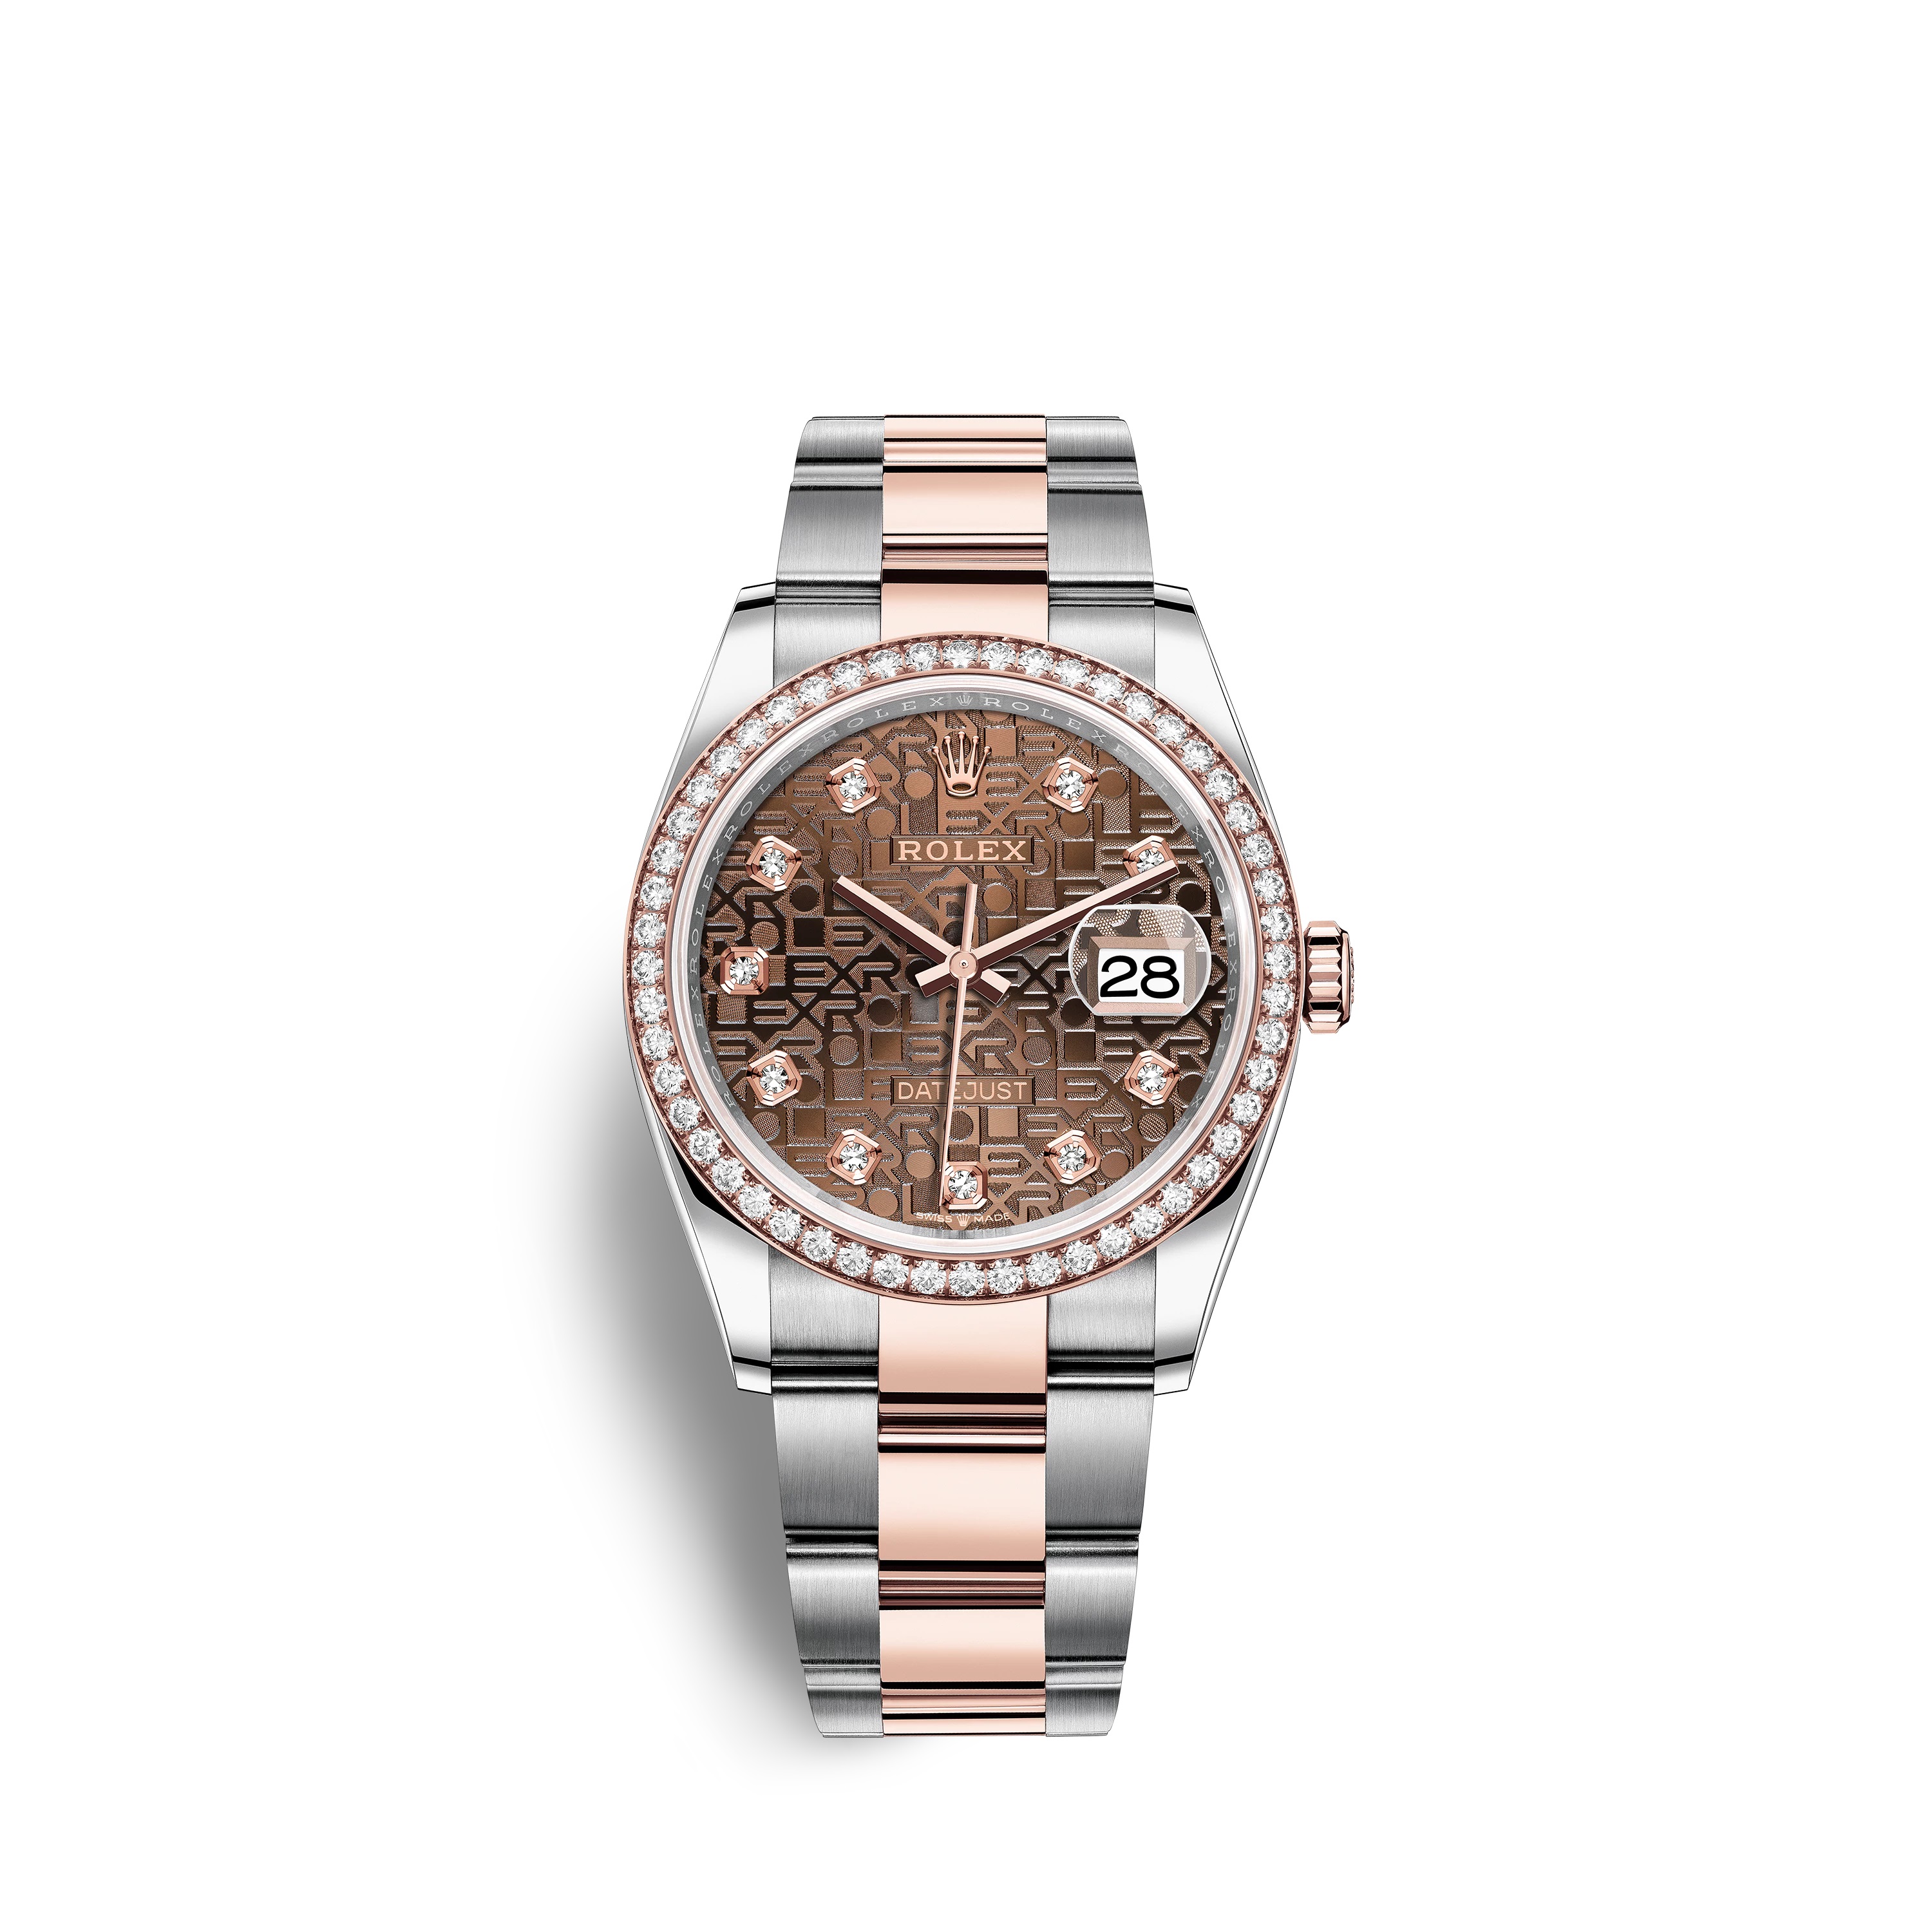 Datejust 36 126281RBR Rose Gold & Stainless Steel Watch (Chocolate Jubilee Design Set with Diamonds)